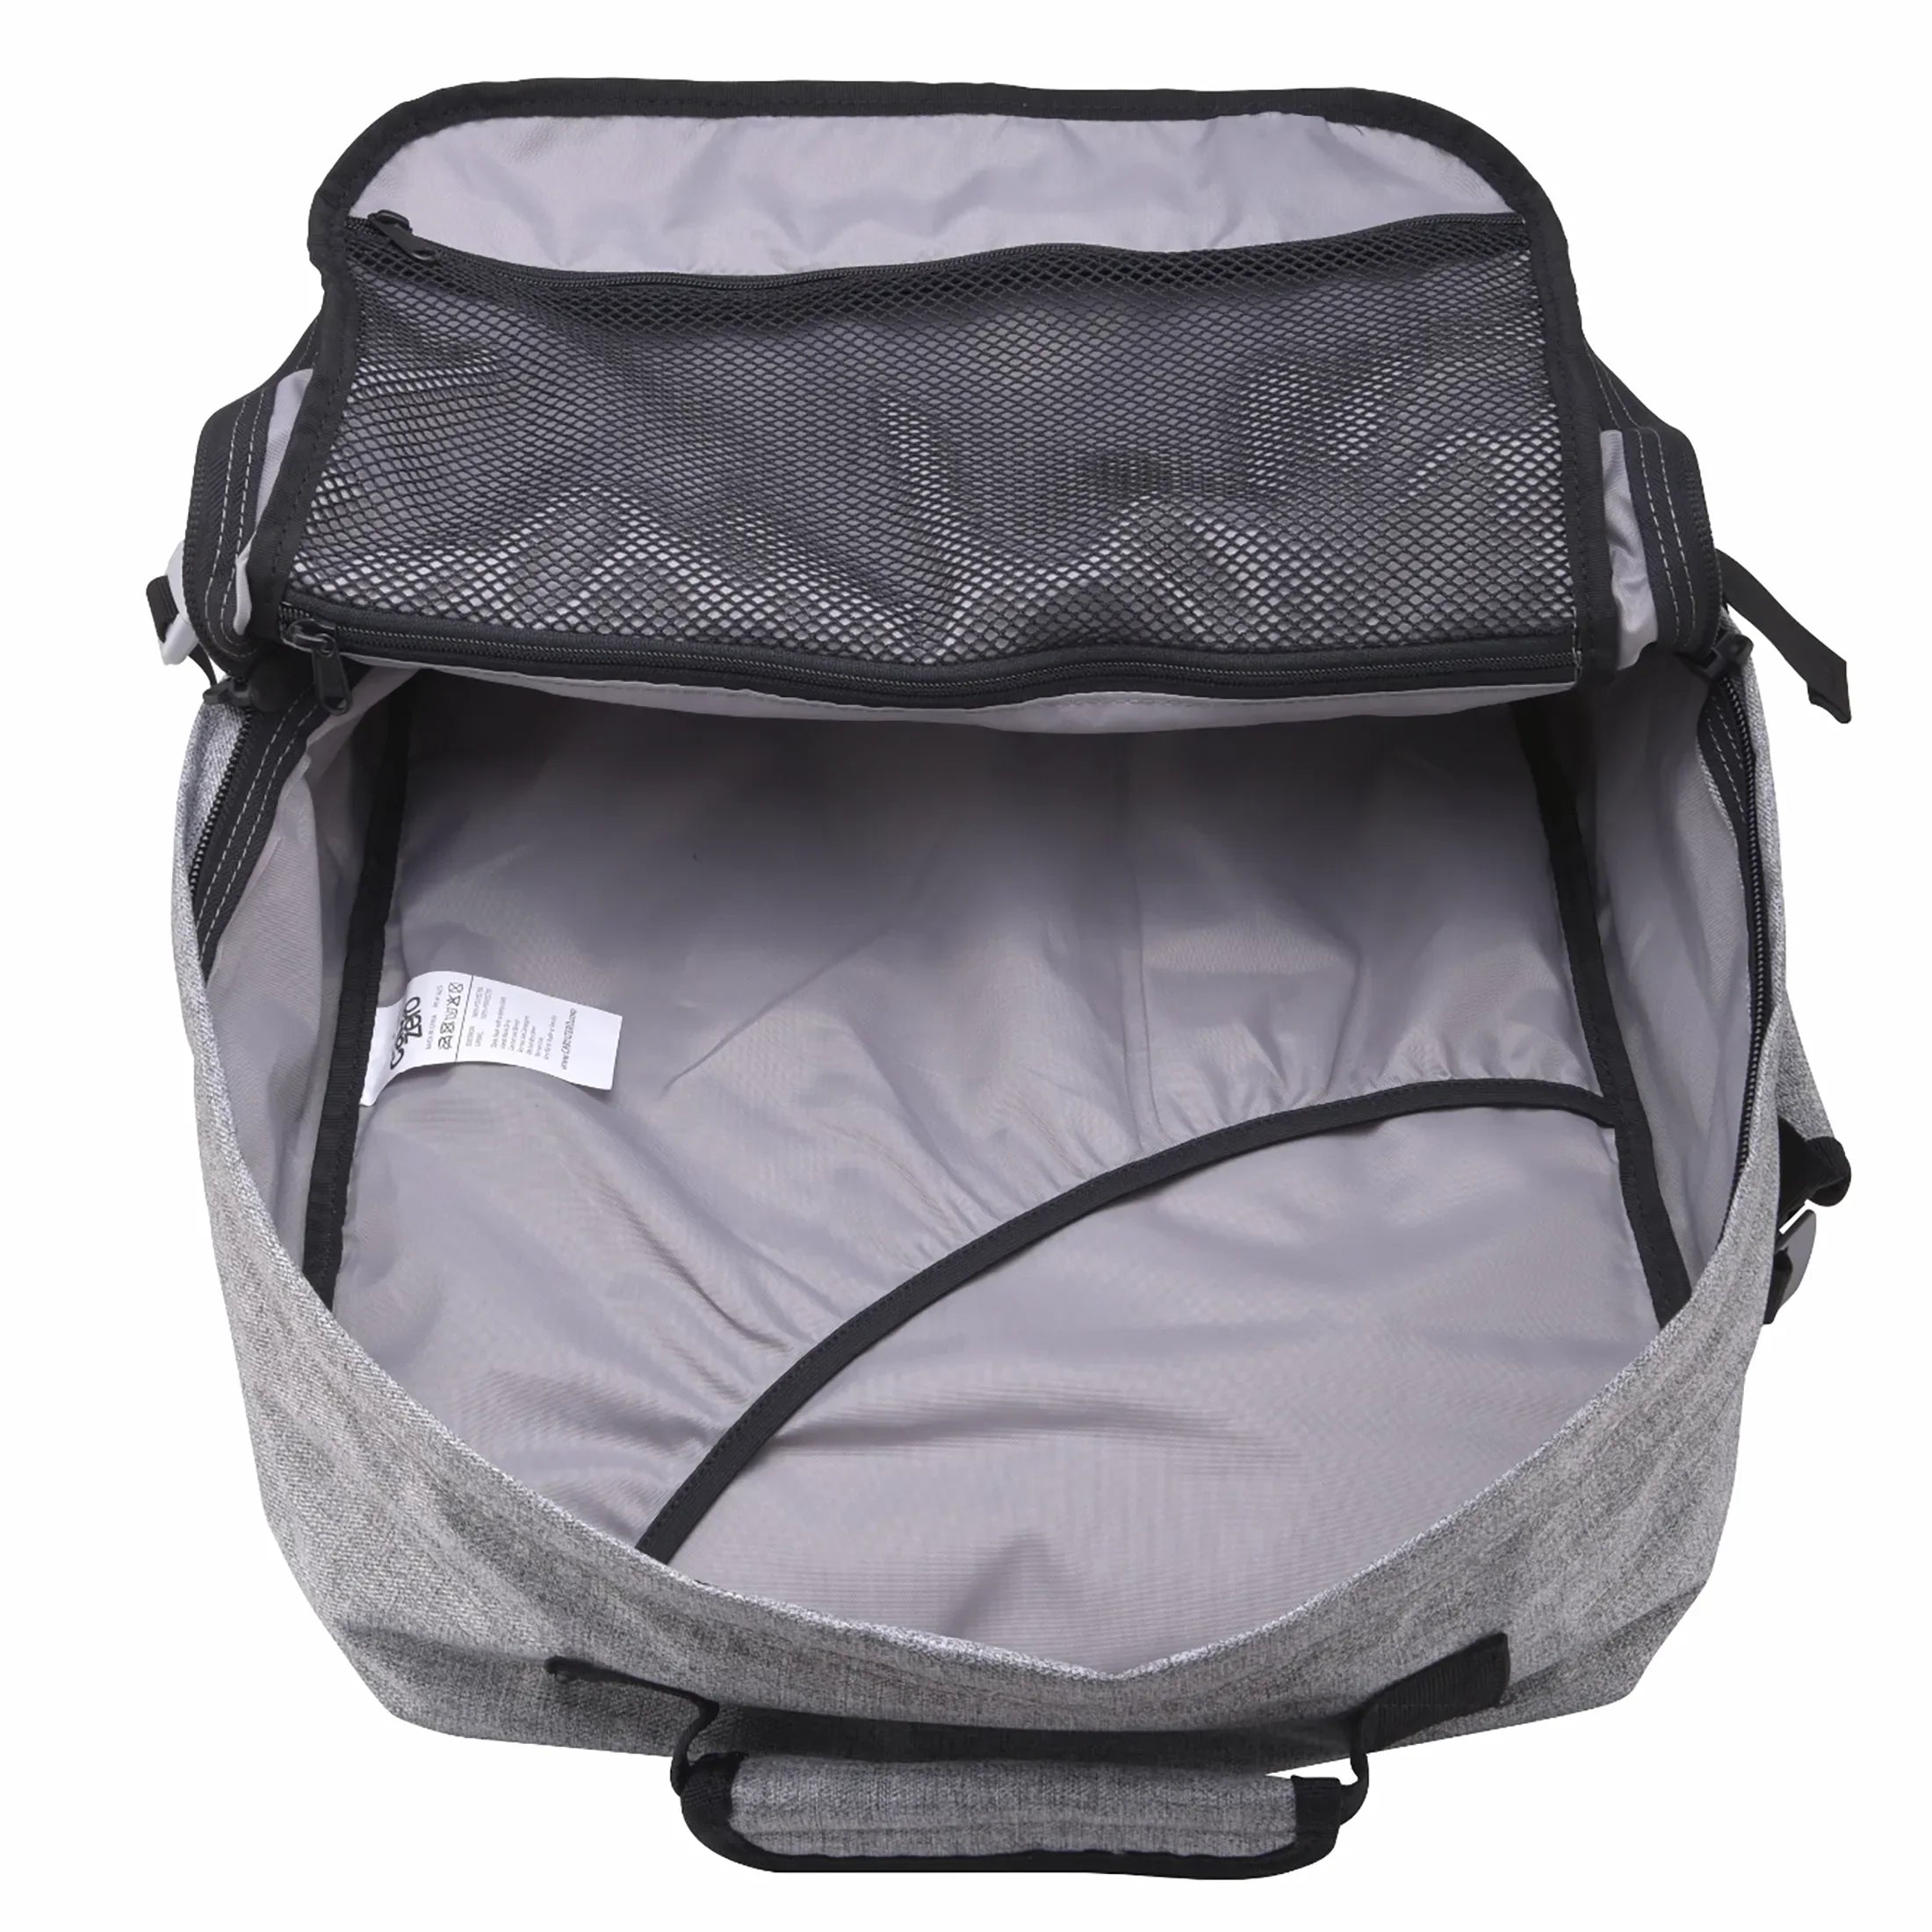 CabinZero Cabin Backpacks Classic 44L Backpack 51 cm - Hoi An